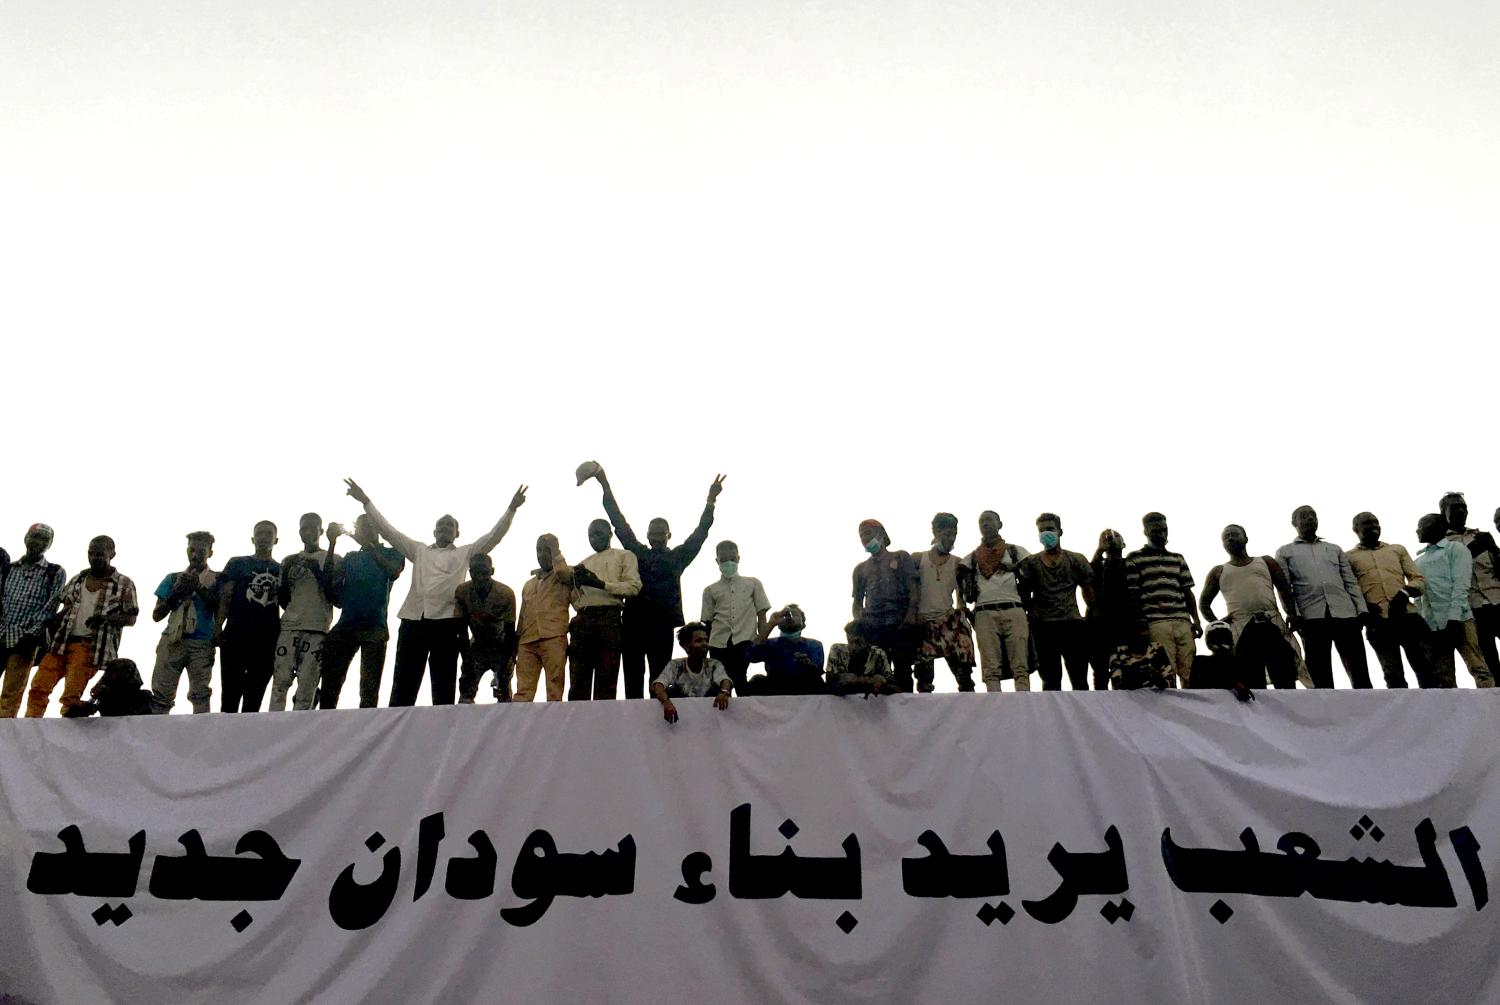 Sudanese demonstrators stand next to a banner reading in Arabic "People want to build new Sudan" as they chant slogans during a protest rally demanding Sudanese President Omar Al-Bashir to step down, outside Defence Ministry in Khartoum, Sudan April 9, 2019. REUTERS/Stringer - RC1BCDBB6200